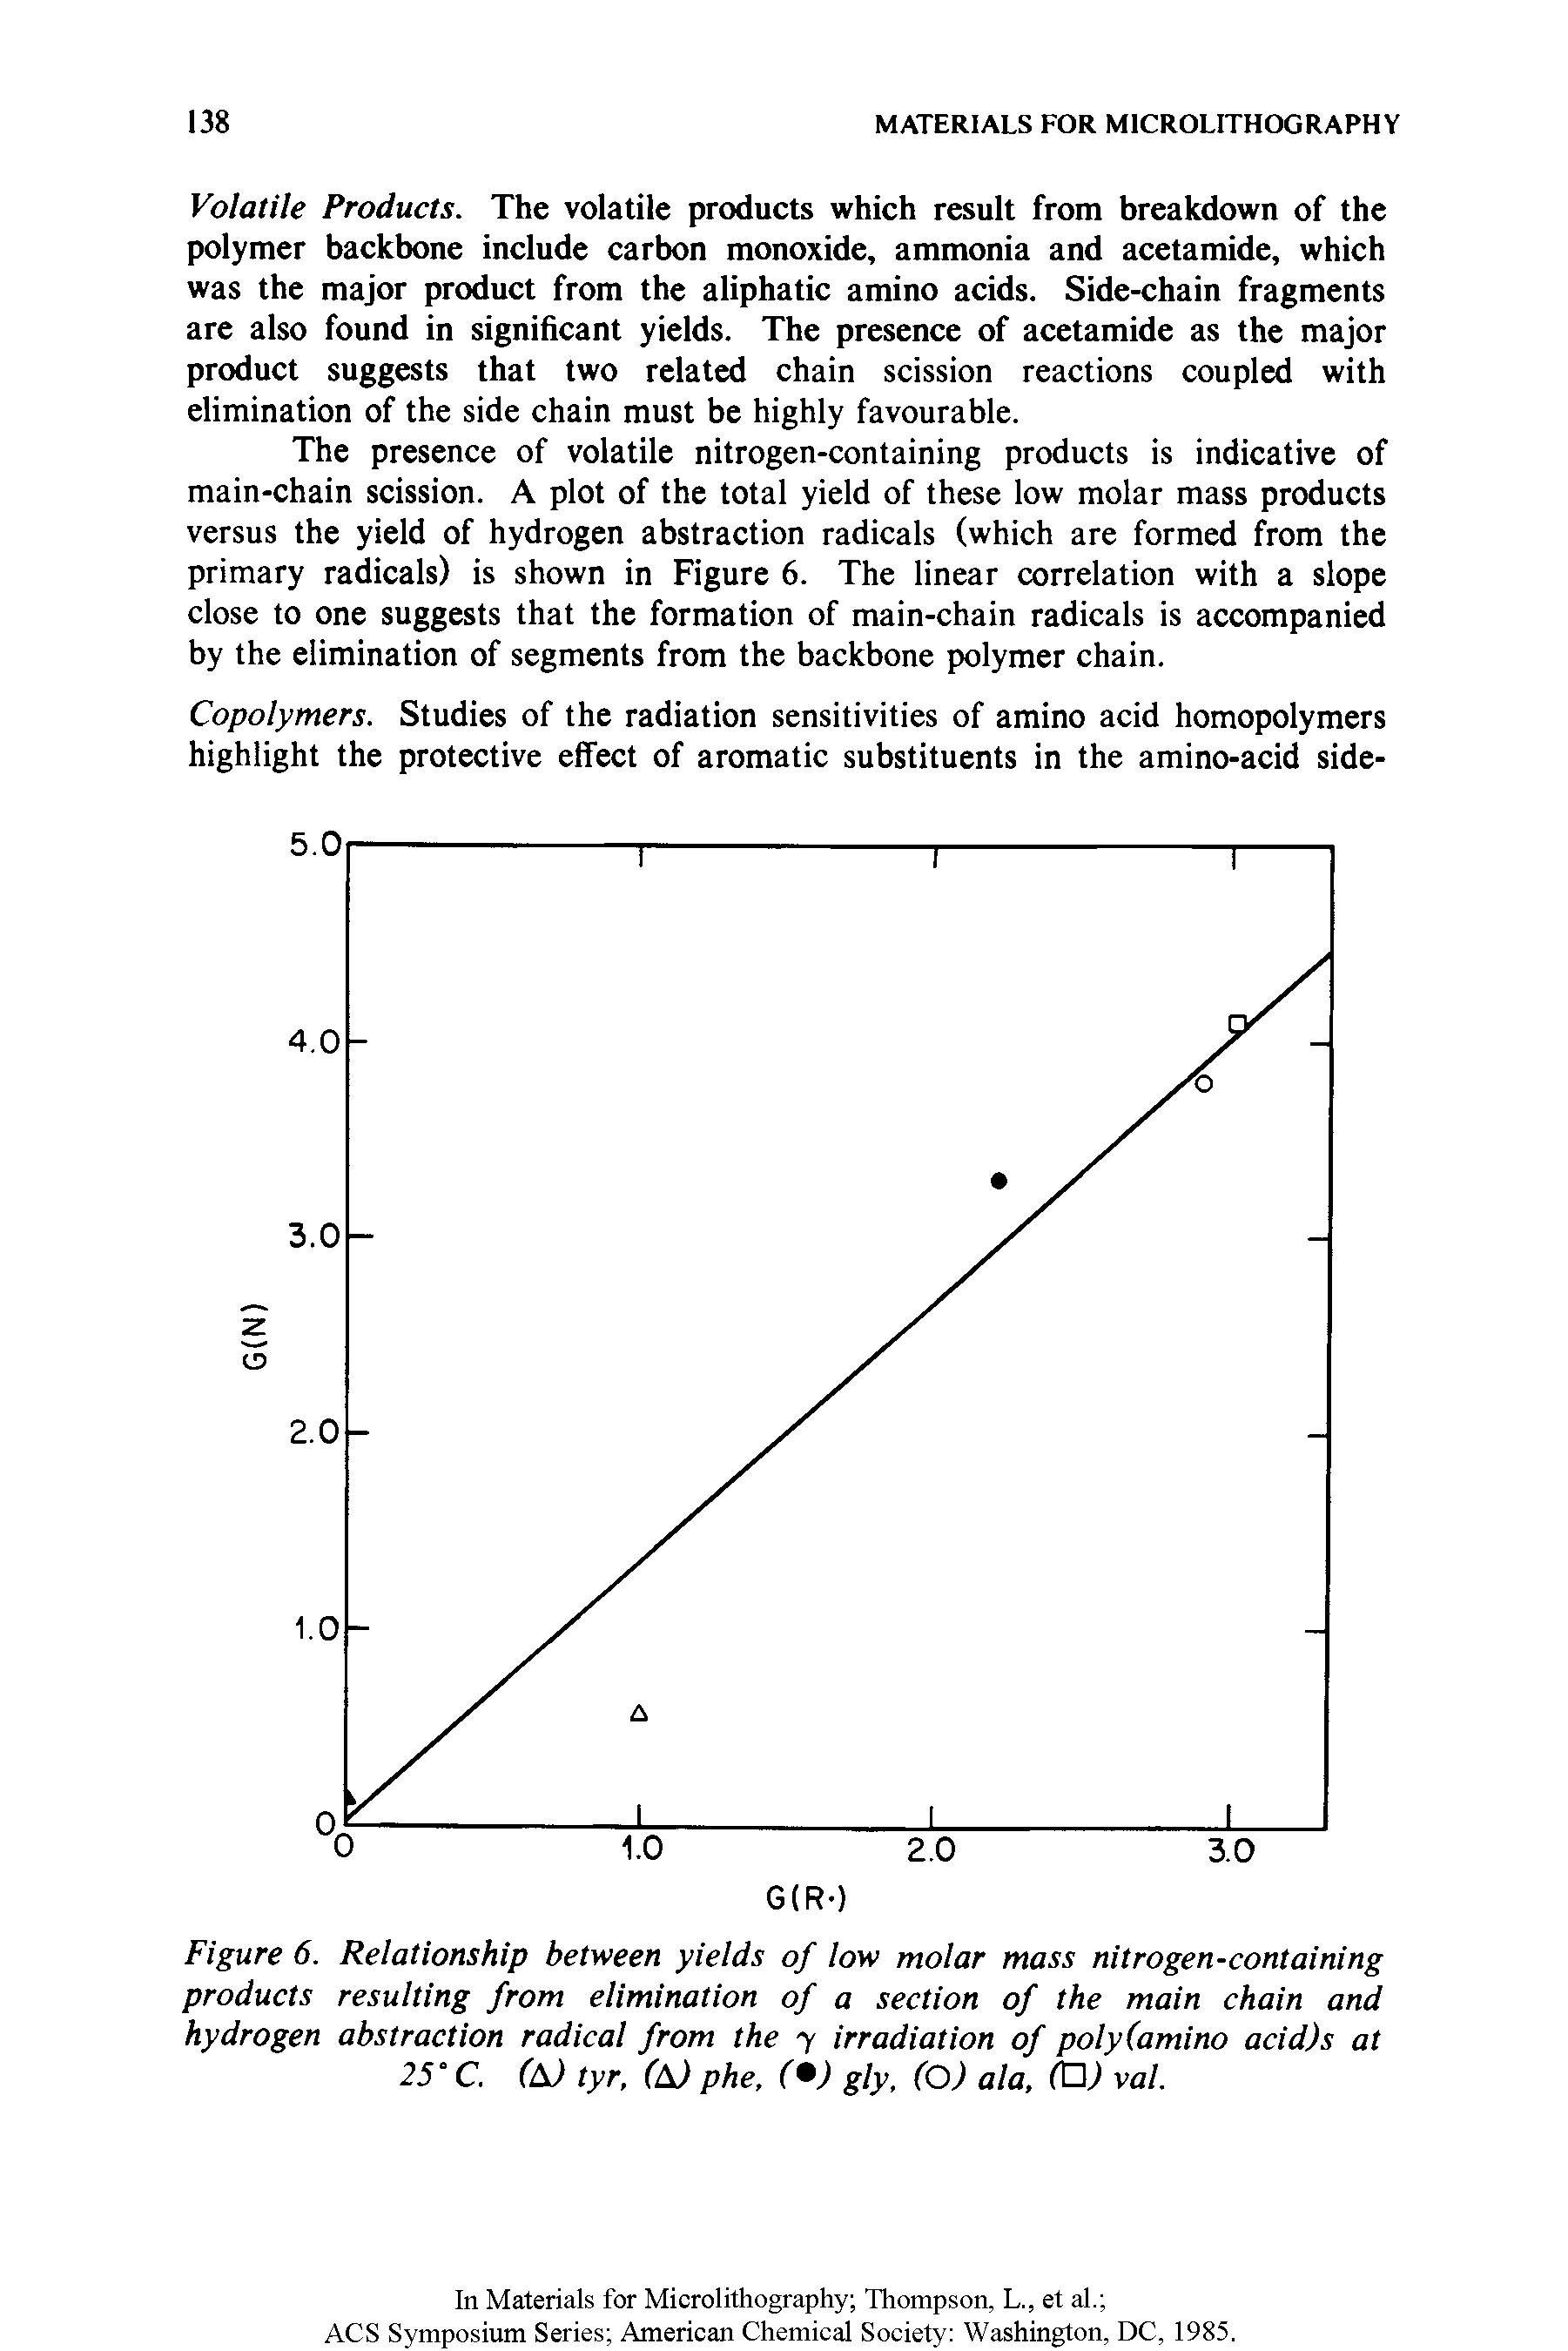 Figure 6. Relationship between yields of low molar mass nitrogen-containing products resulting from elimination of a section of the main chain and hydrogen abstraction radical from the irradiation of poly(amino acid)s at 25° C. (A) tyr, (A) phe, ( ) gly, (O) ala, ) val.